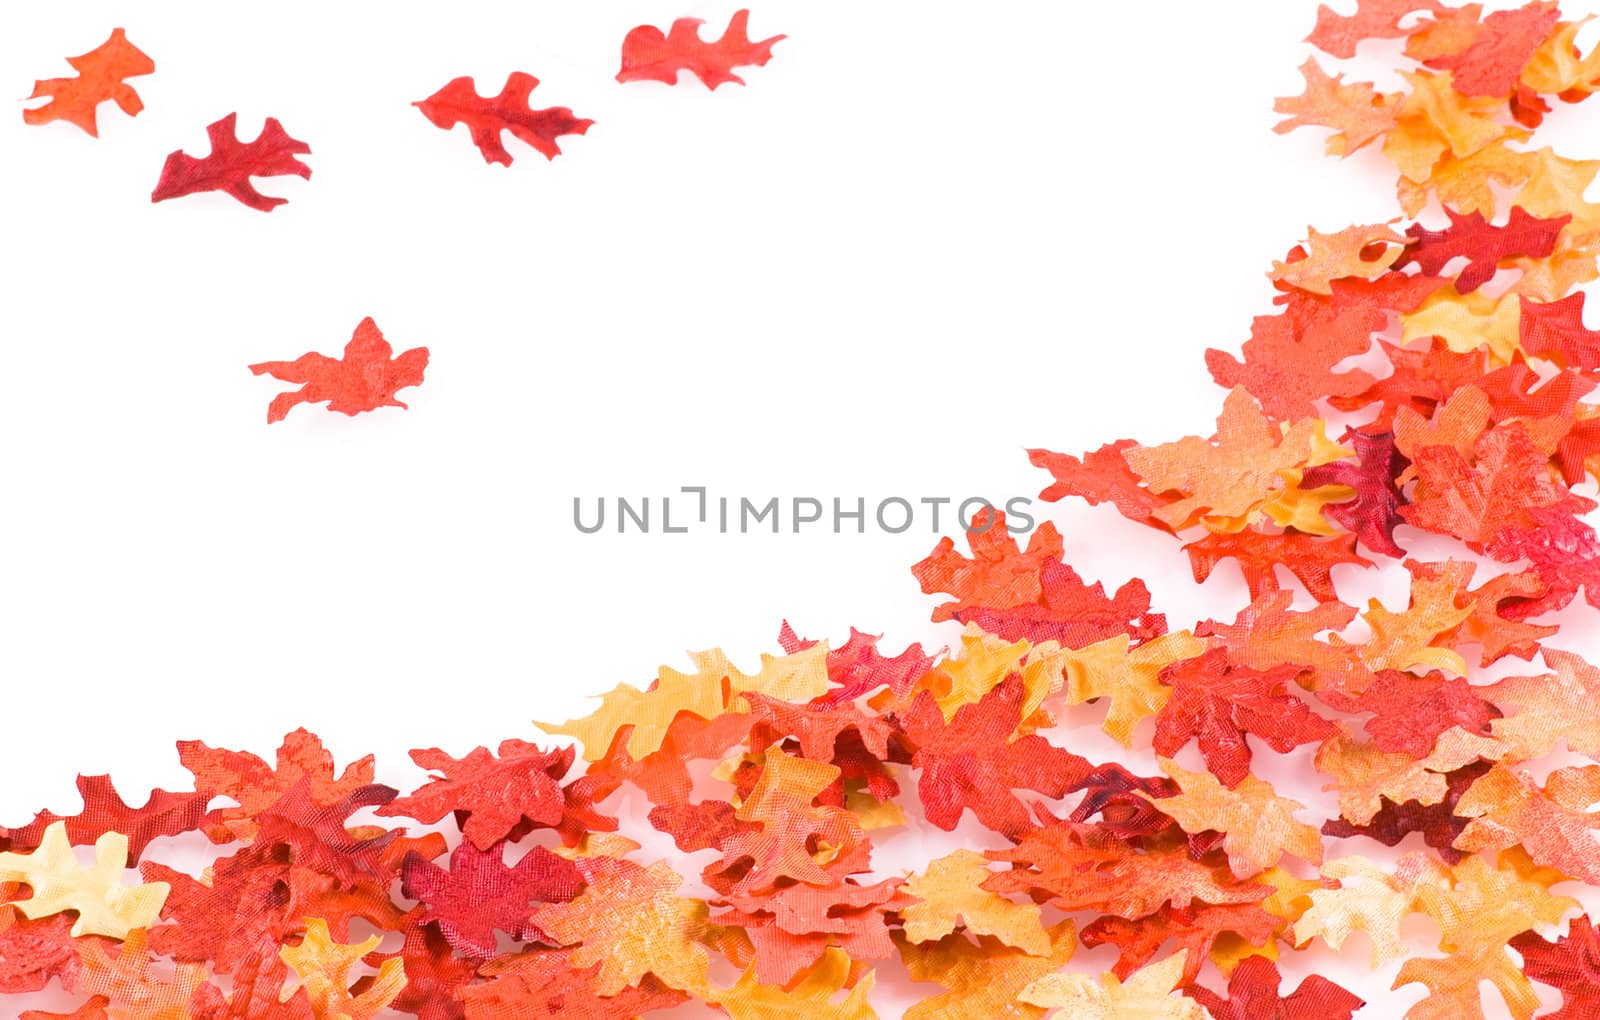 Autumn leaves background with copy-space, isolated on white.